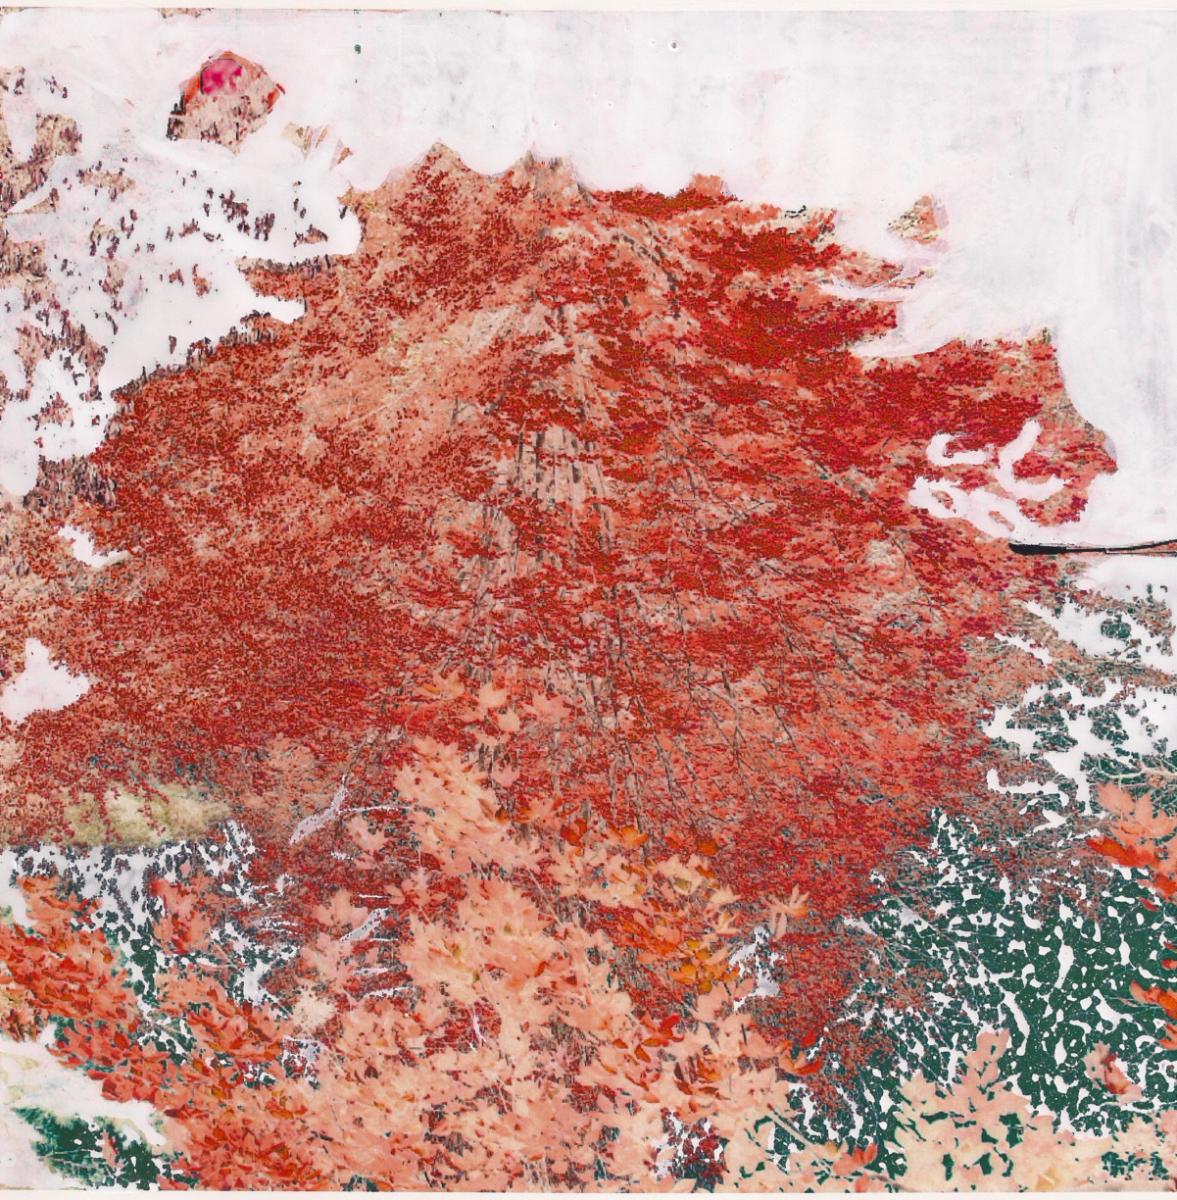 Burning (Red) Bush: original abstract landscape painting on color photograph